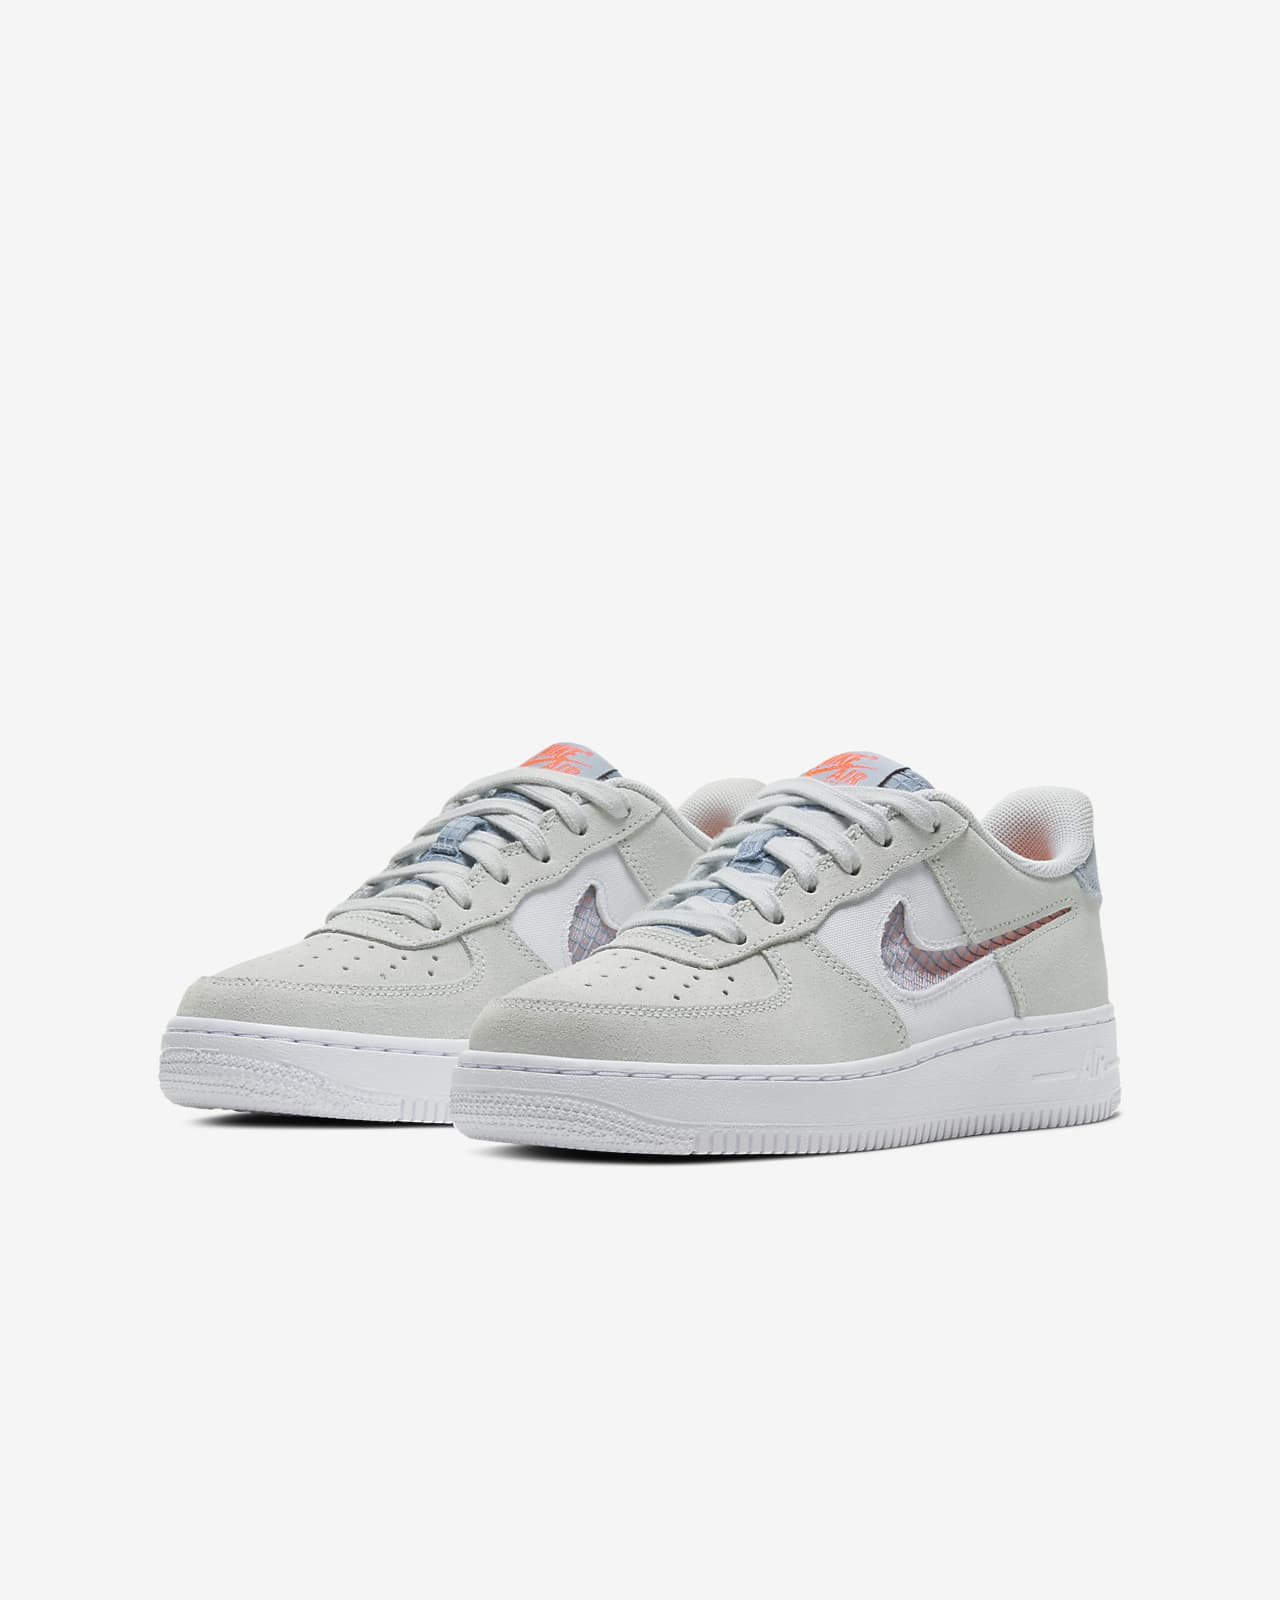 air force 1 07 youth